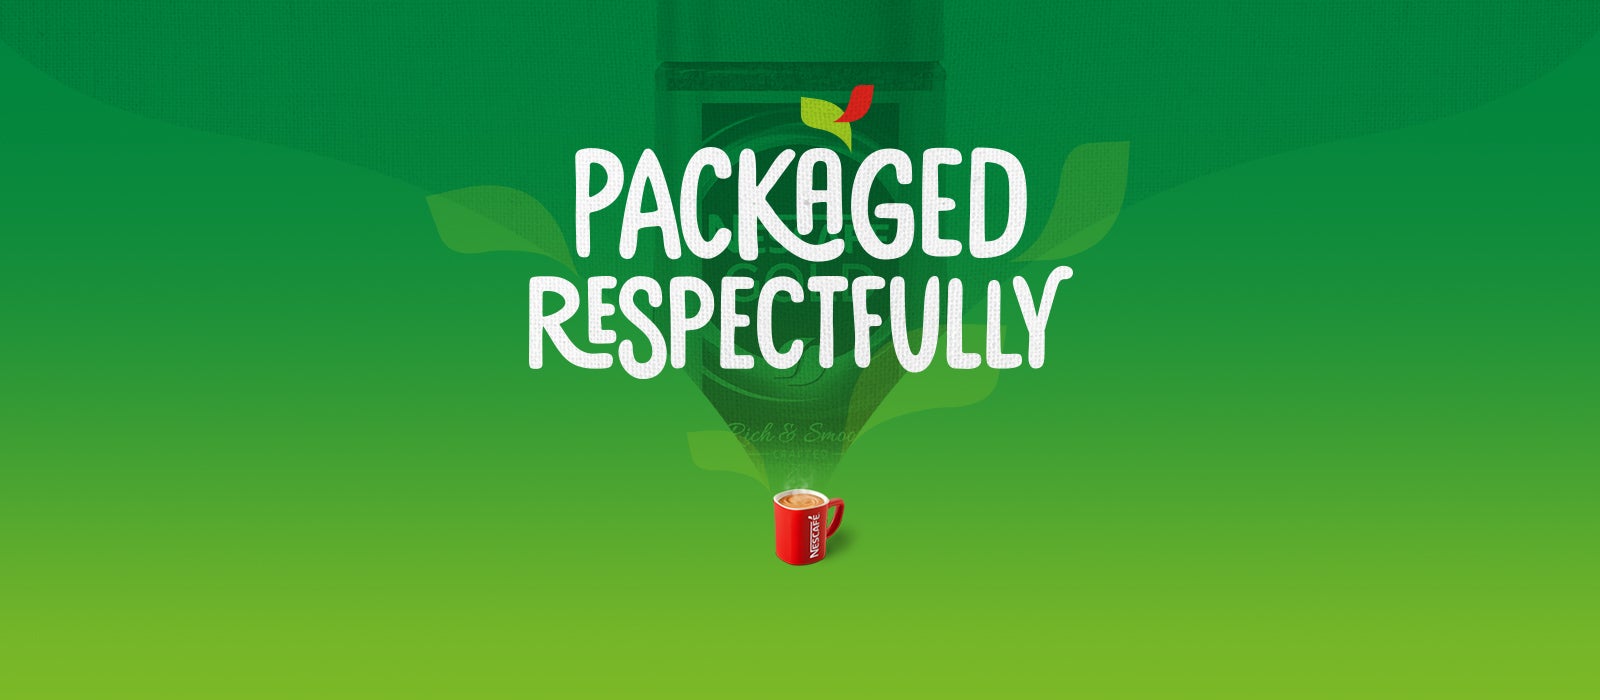 Packaged Respectfully